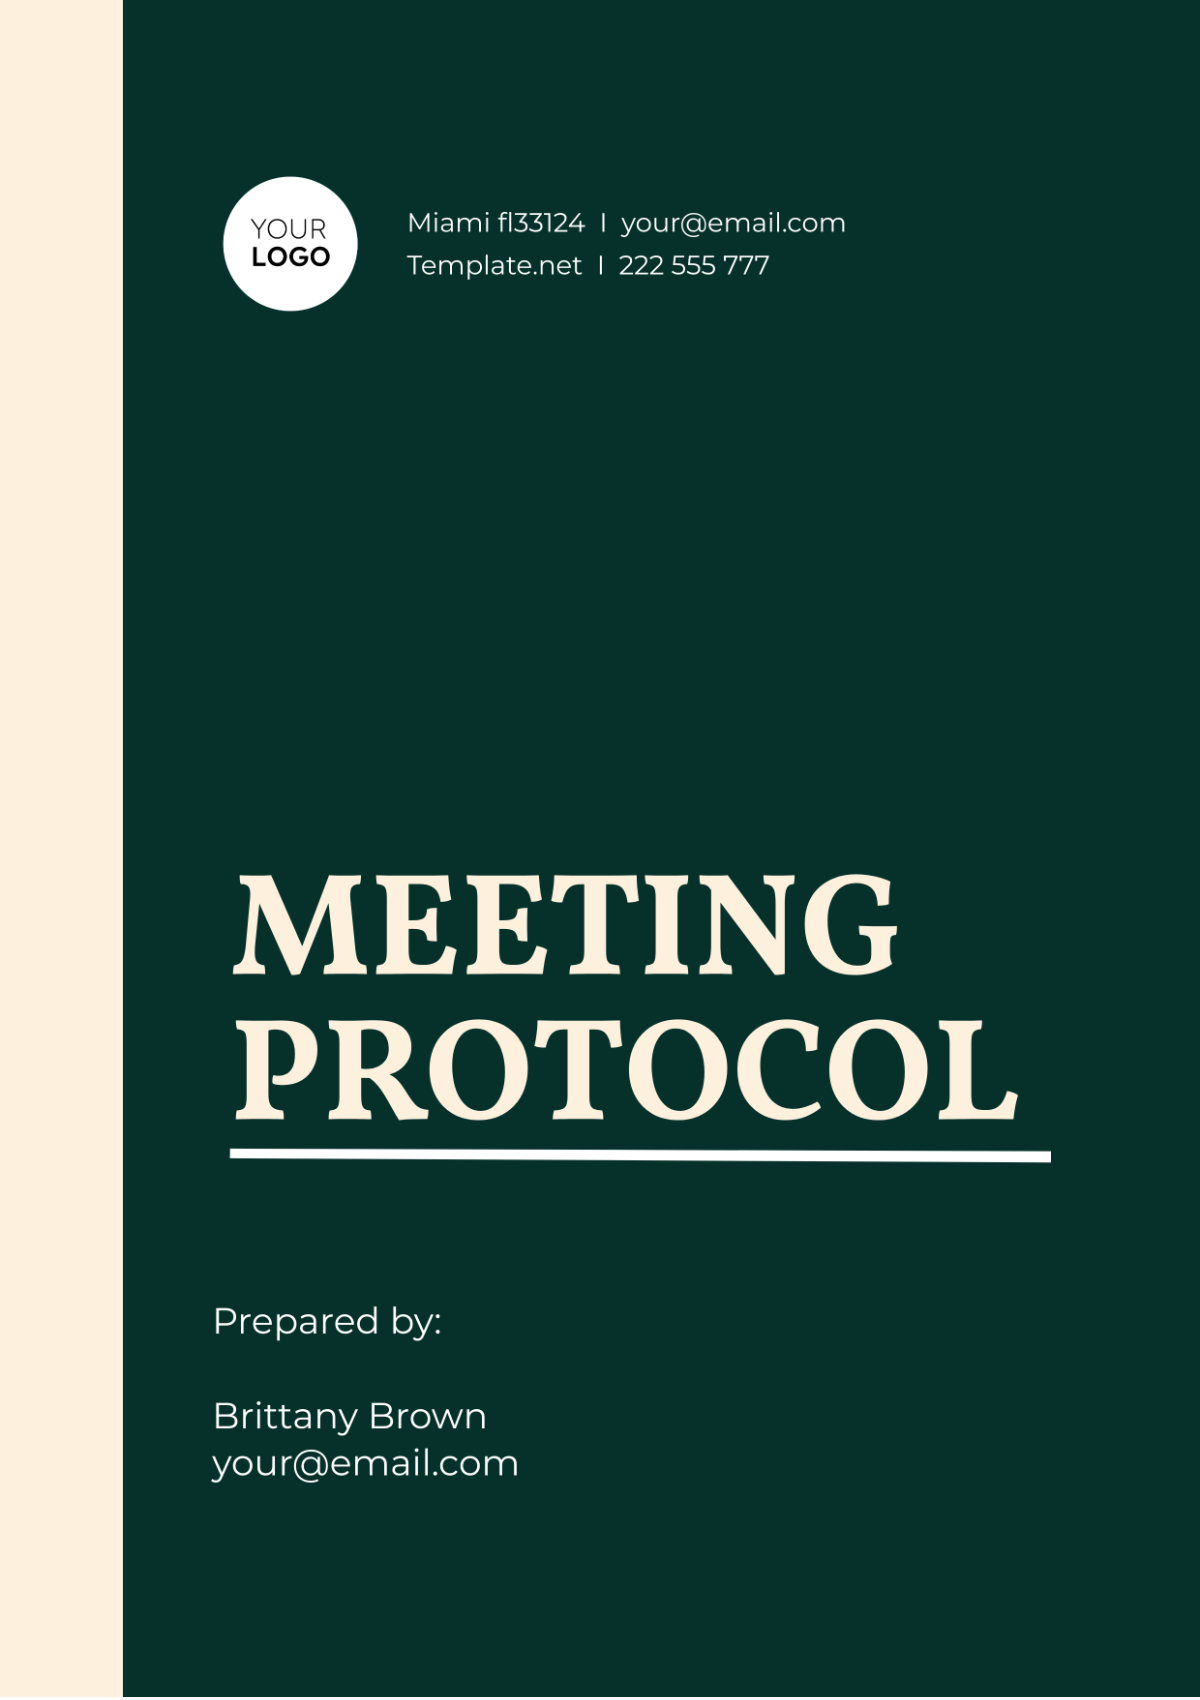 Meeting Protocol Template